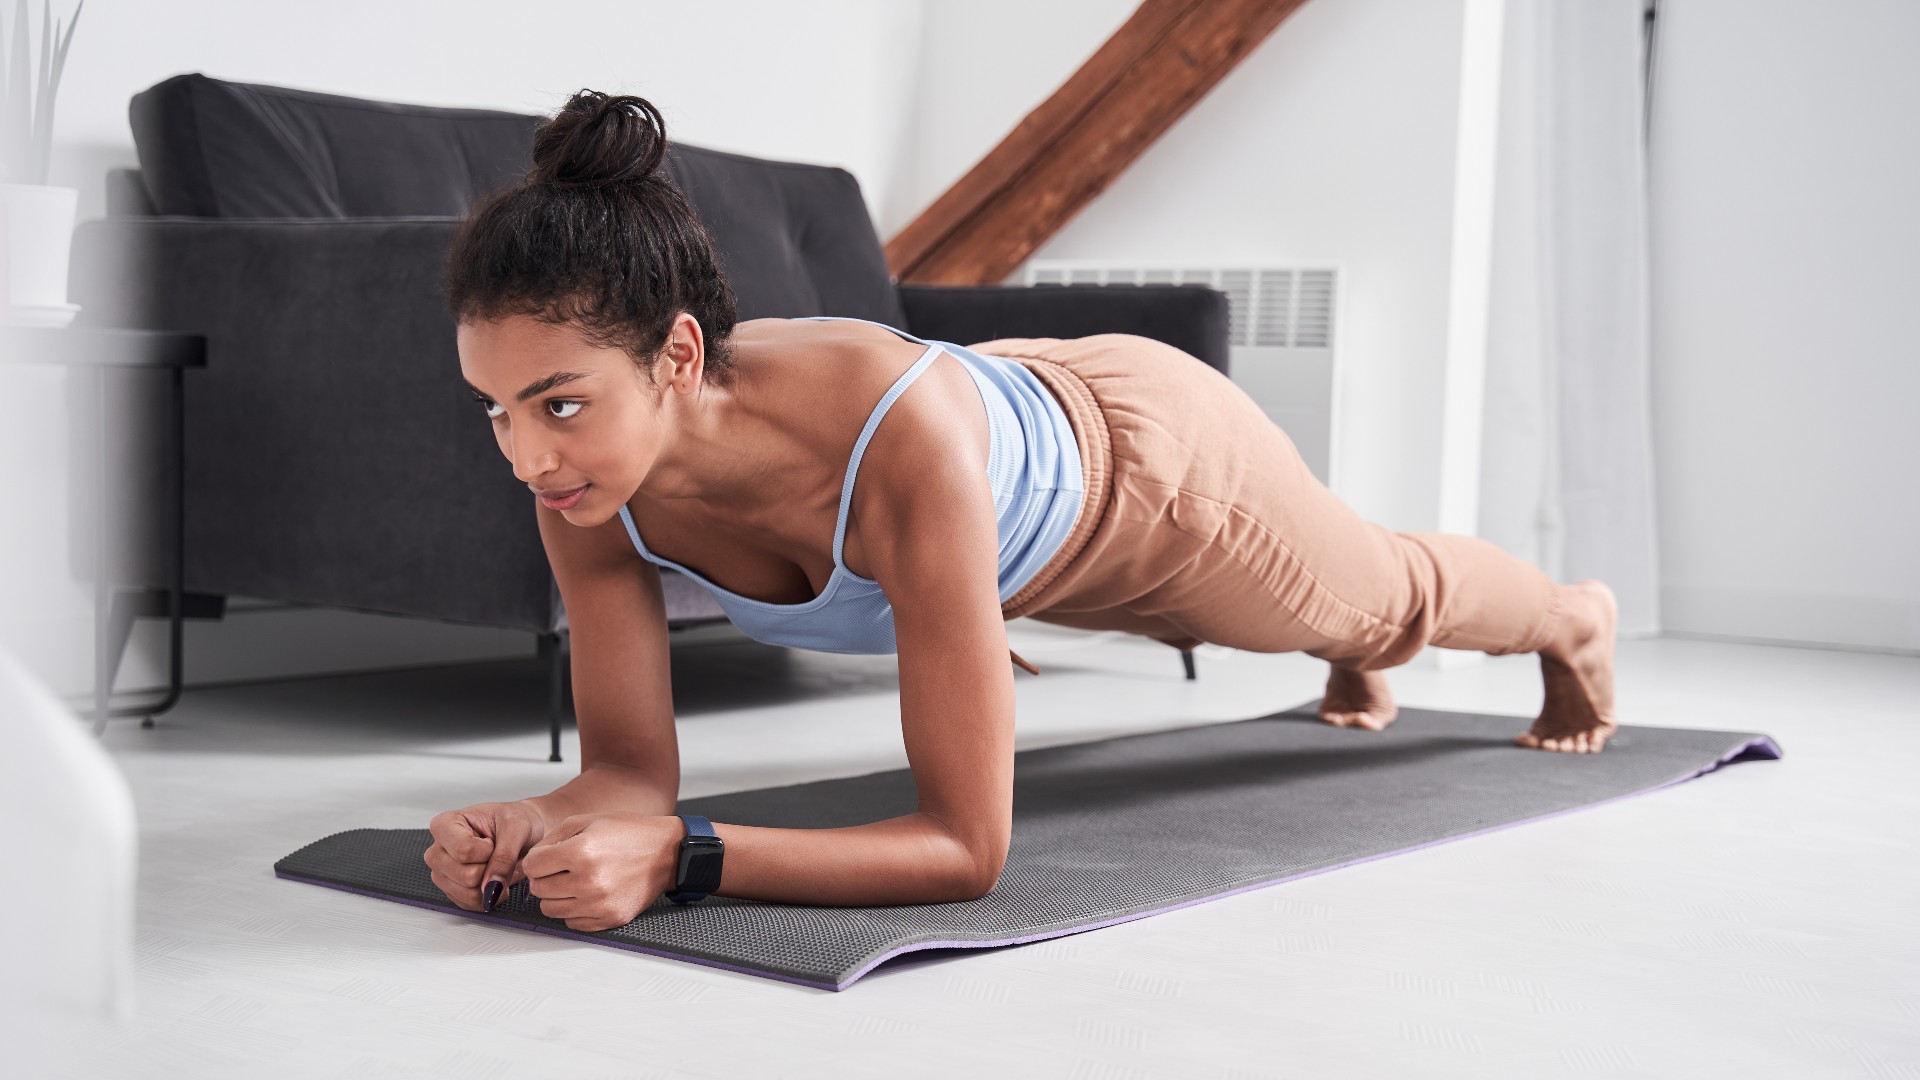 I did a plank every day for a month – and these were the results